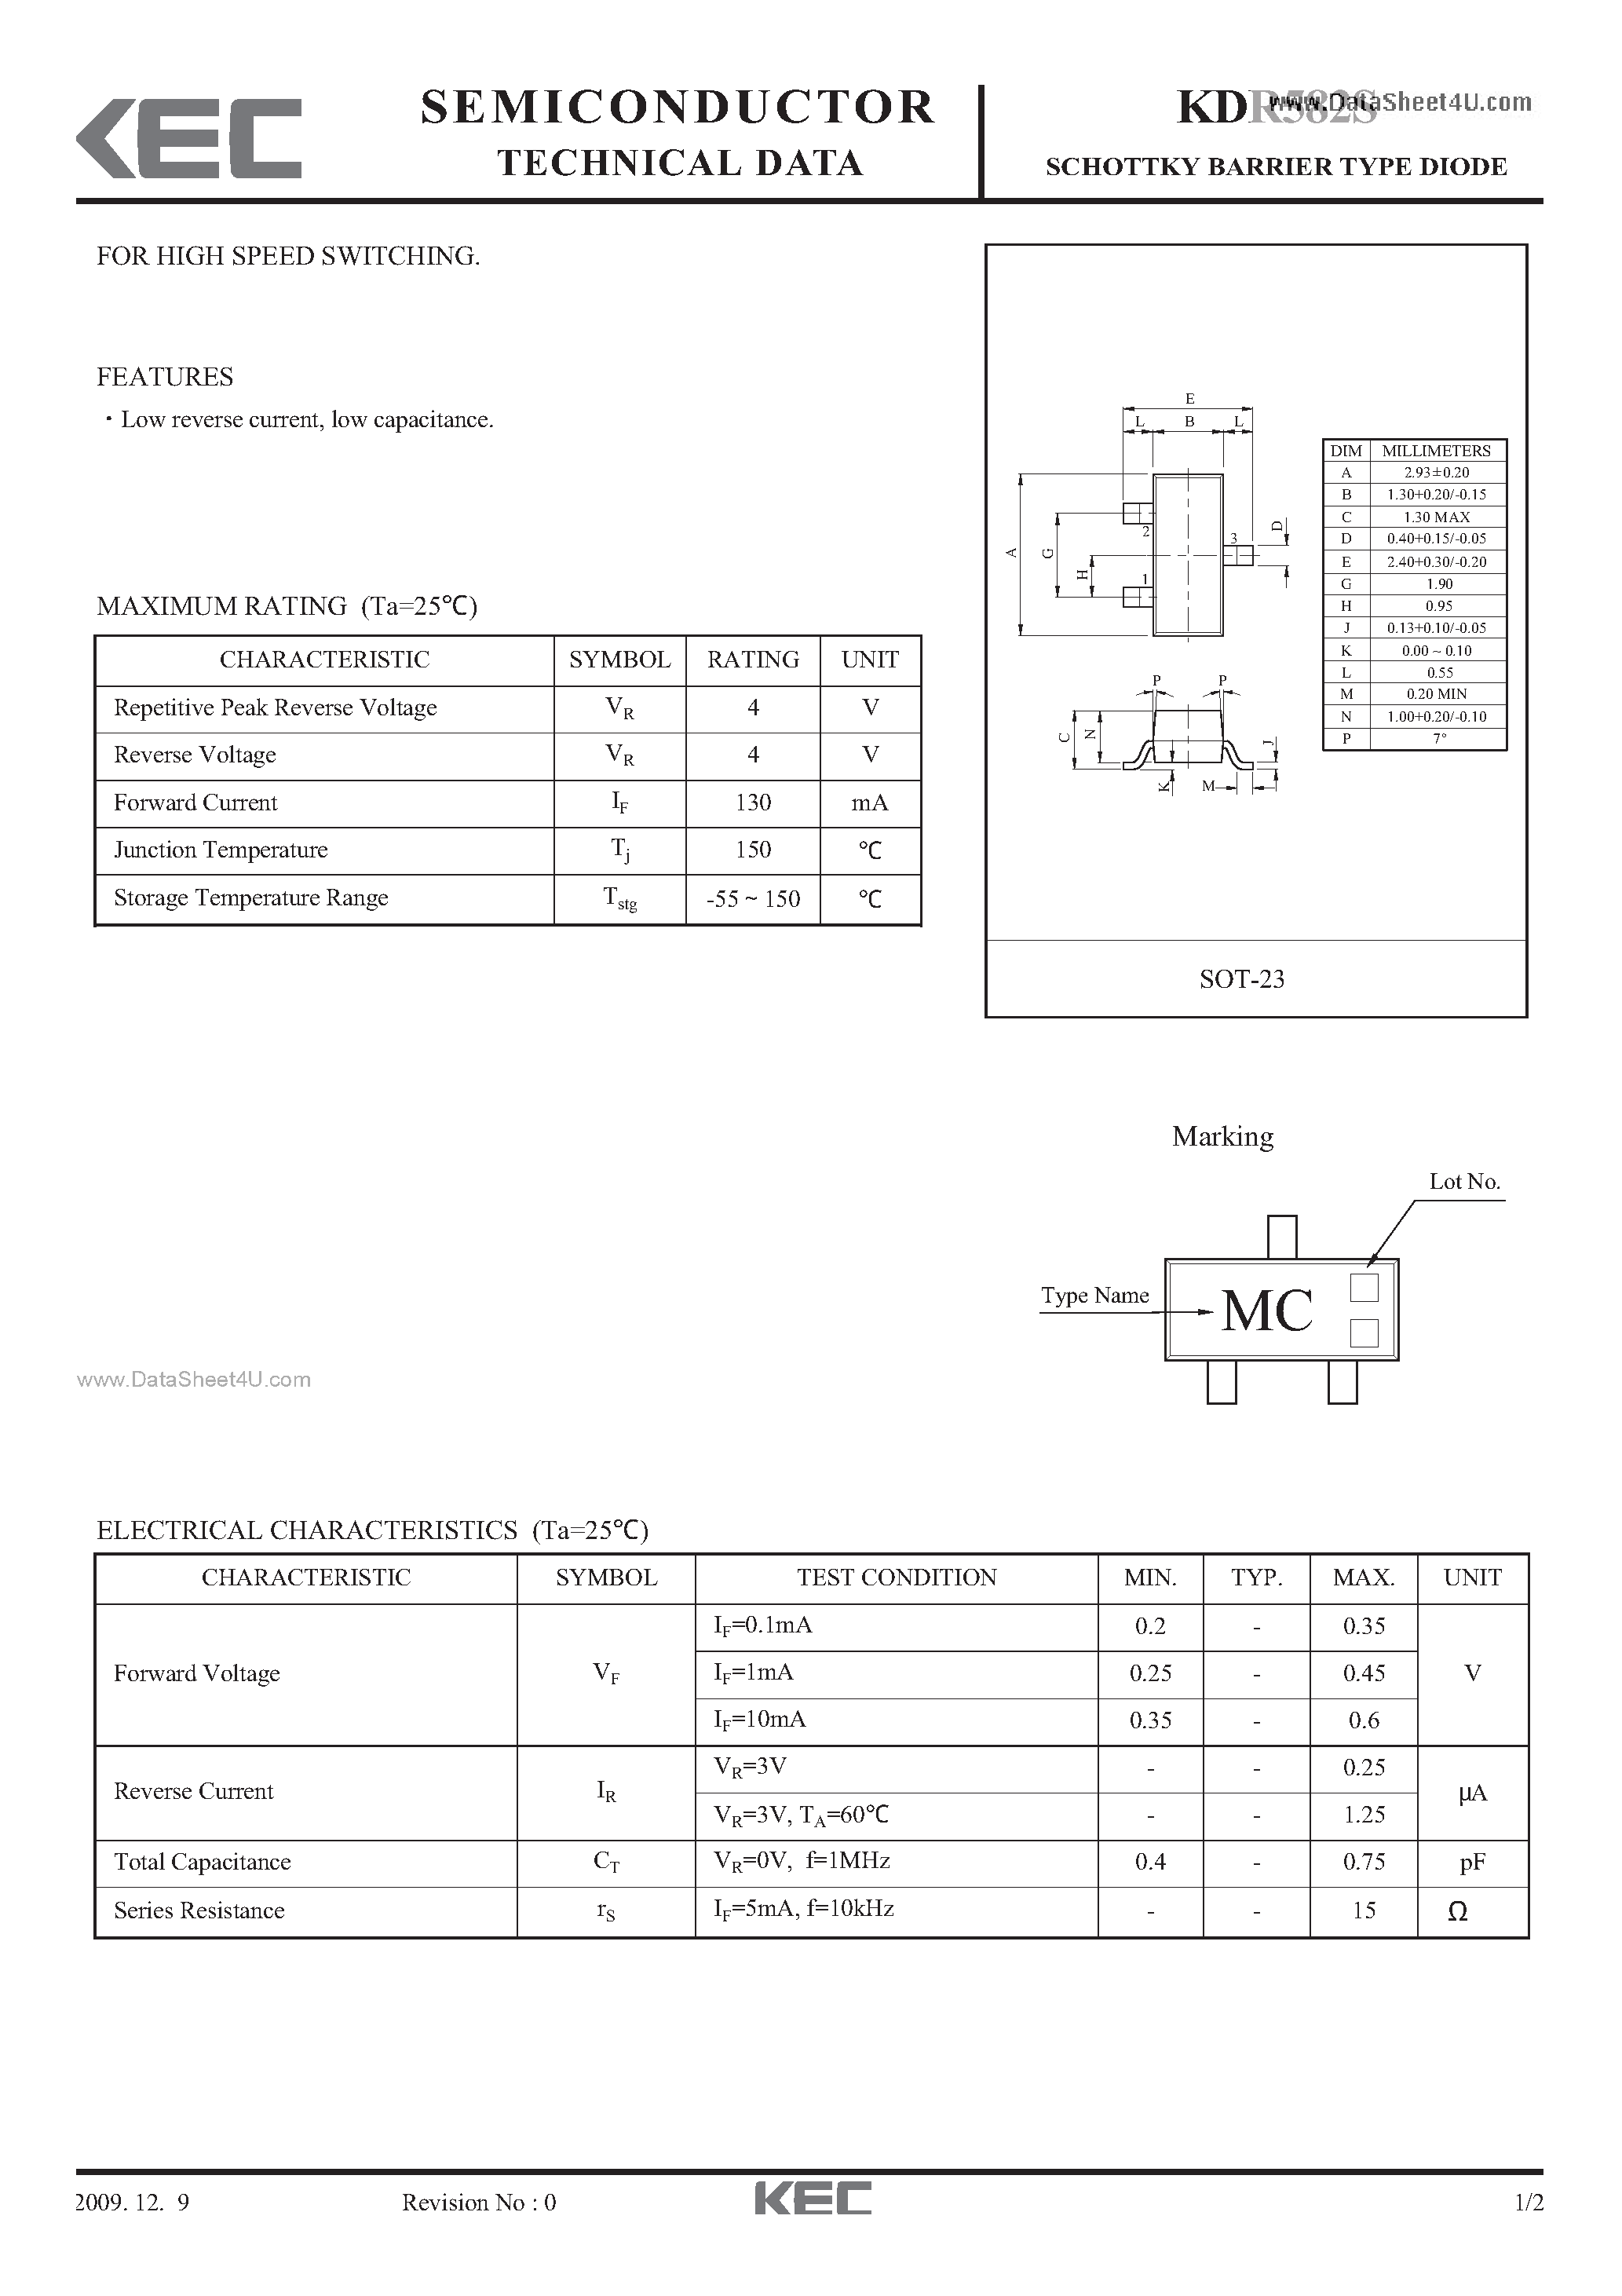 Datasheet KDR582S - SCHOTTKY BARRIER TYPE DIODE page 1